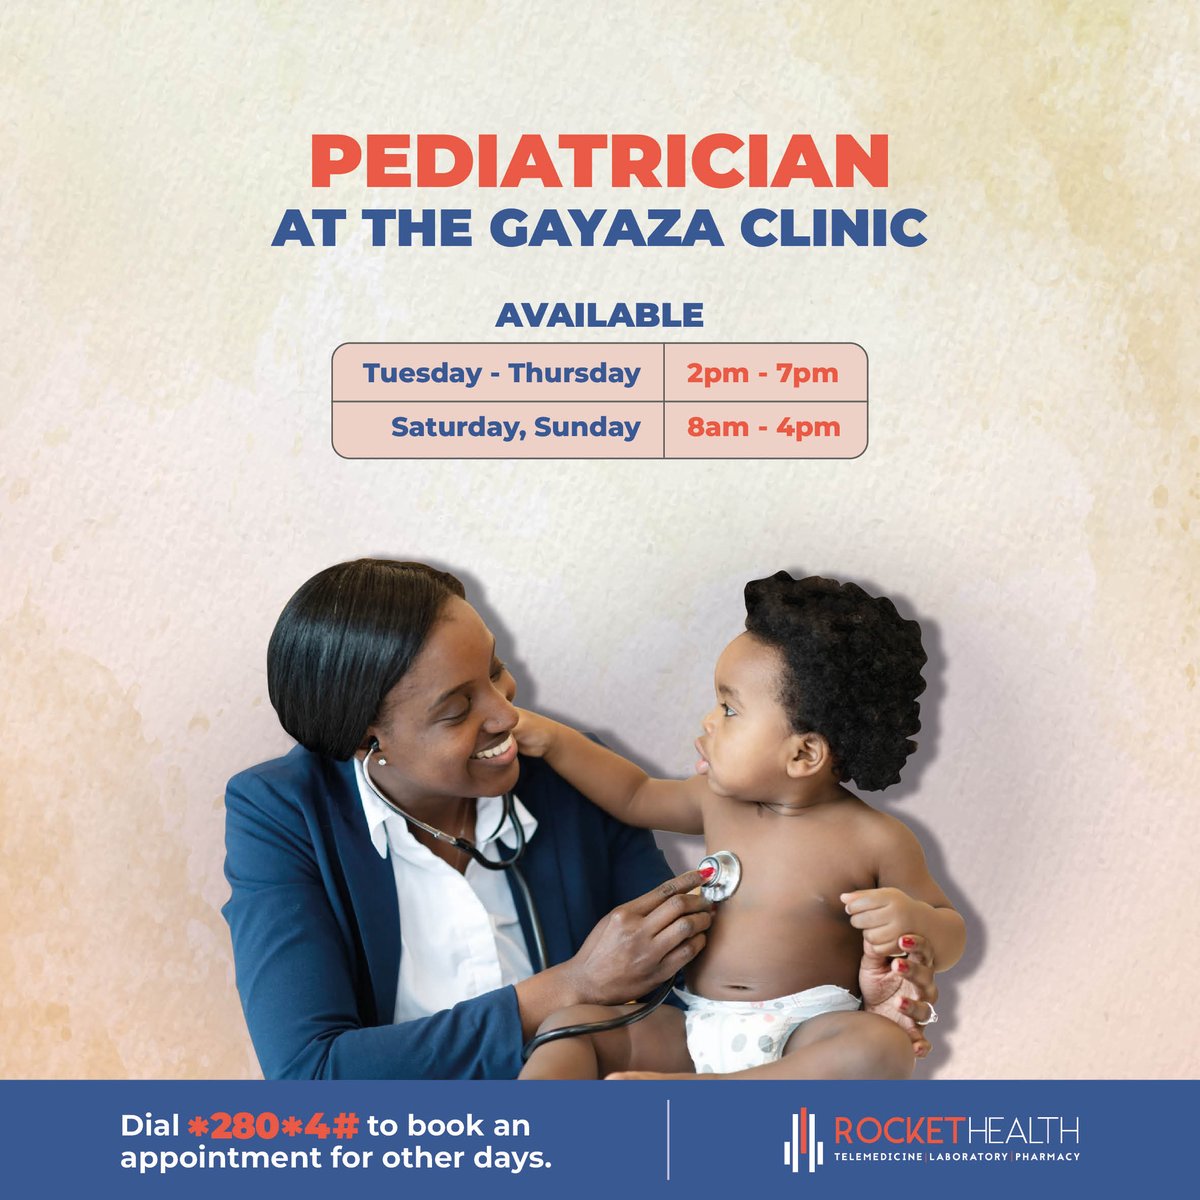 Make the little ones' health a priority: Our Pediatrician is available for walk-ins at the #RocketHealth Gayaza Clinic and appointments via 📲*280*4#